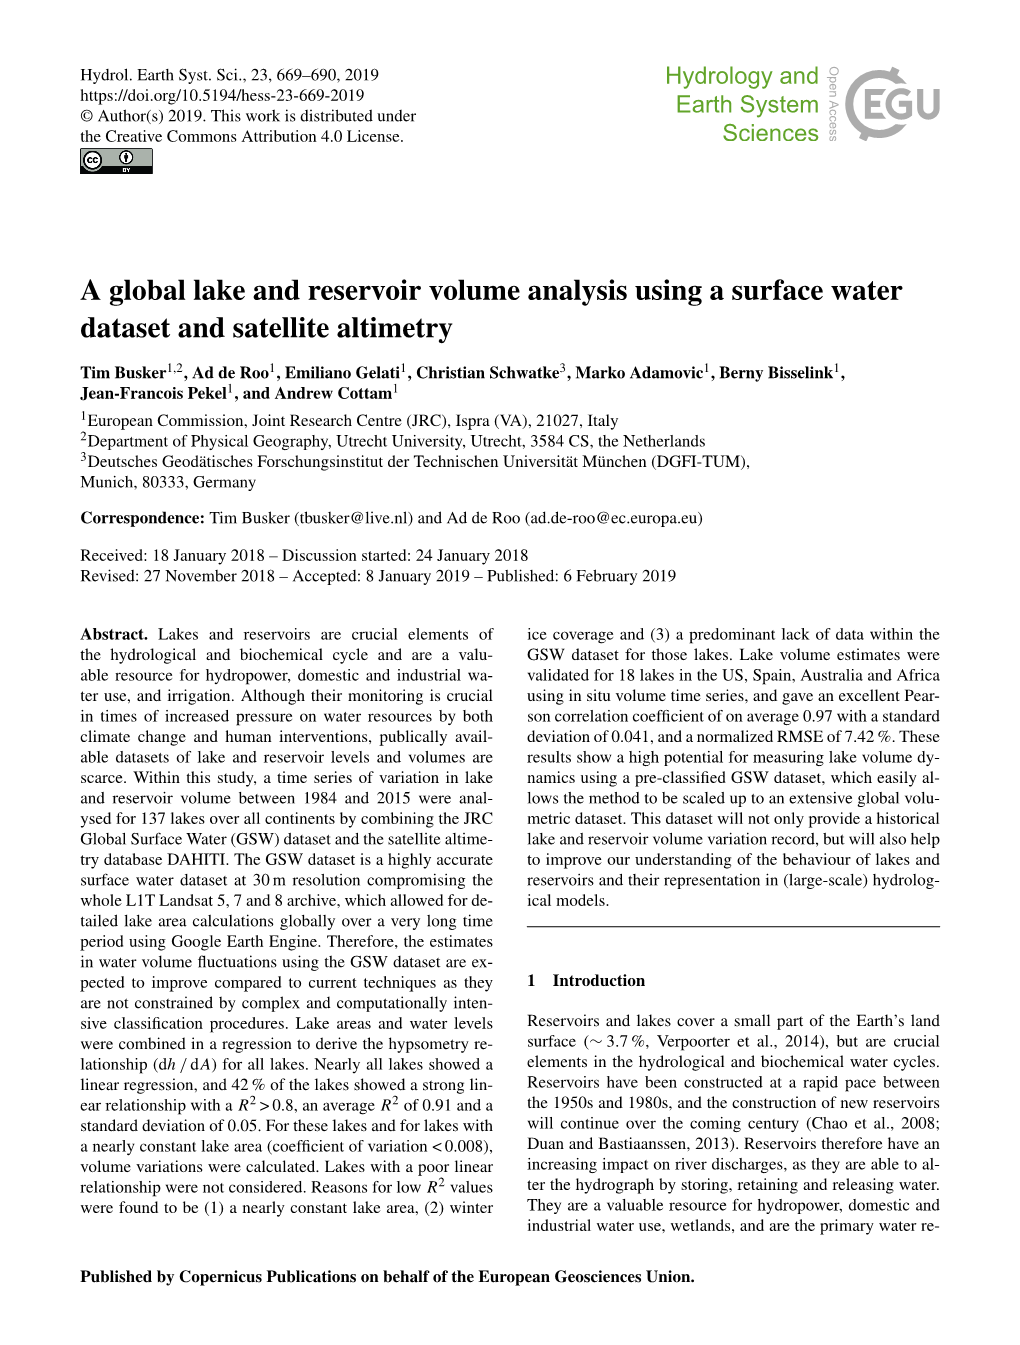 A Global Lake and Reservoir Volume Analysis Using a Surface Water Dataset and Satellite Altimetry